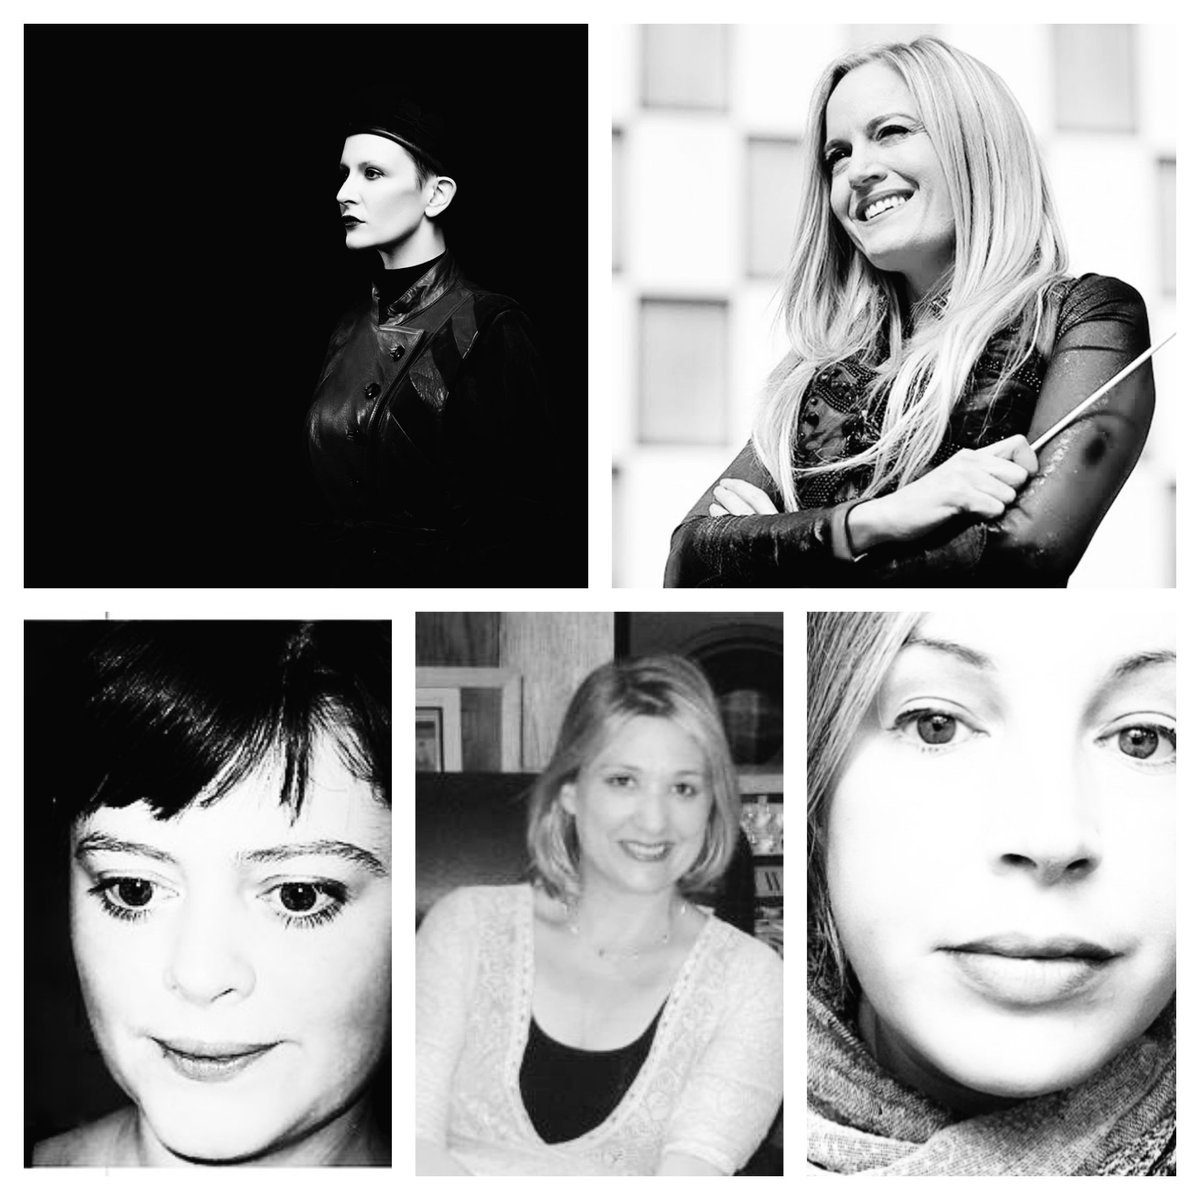 Happy International Women's Day to all our female members 🎶 Pictured here @Die_Hexen @eimearnoone @siobhanbcleary , @CathleenFlynn13 & @abigailsong You can learn more about Irish based composers at our professional composer directory scg.ie @WFTIreland